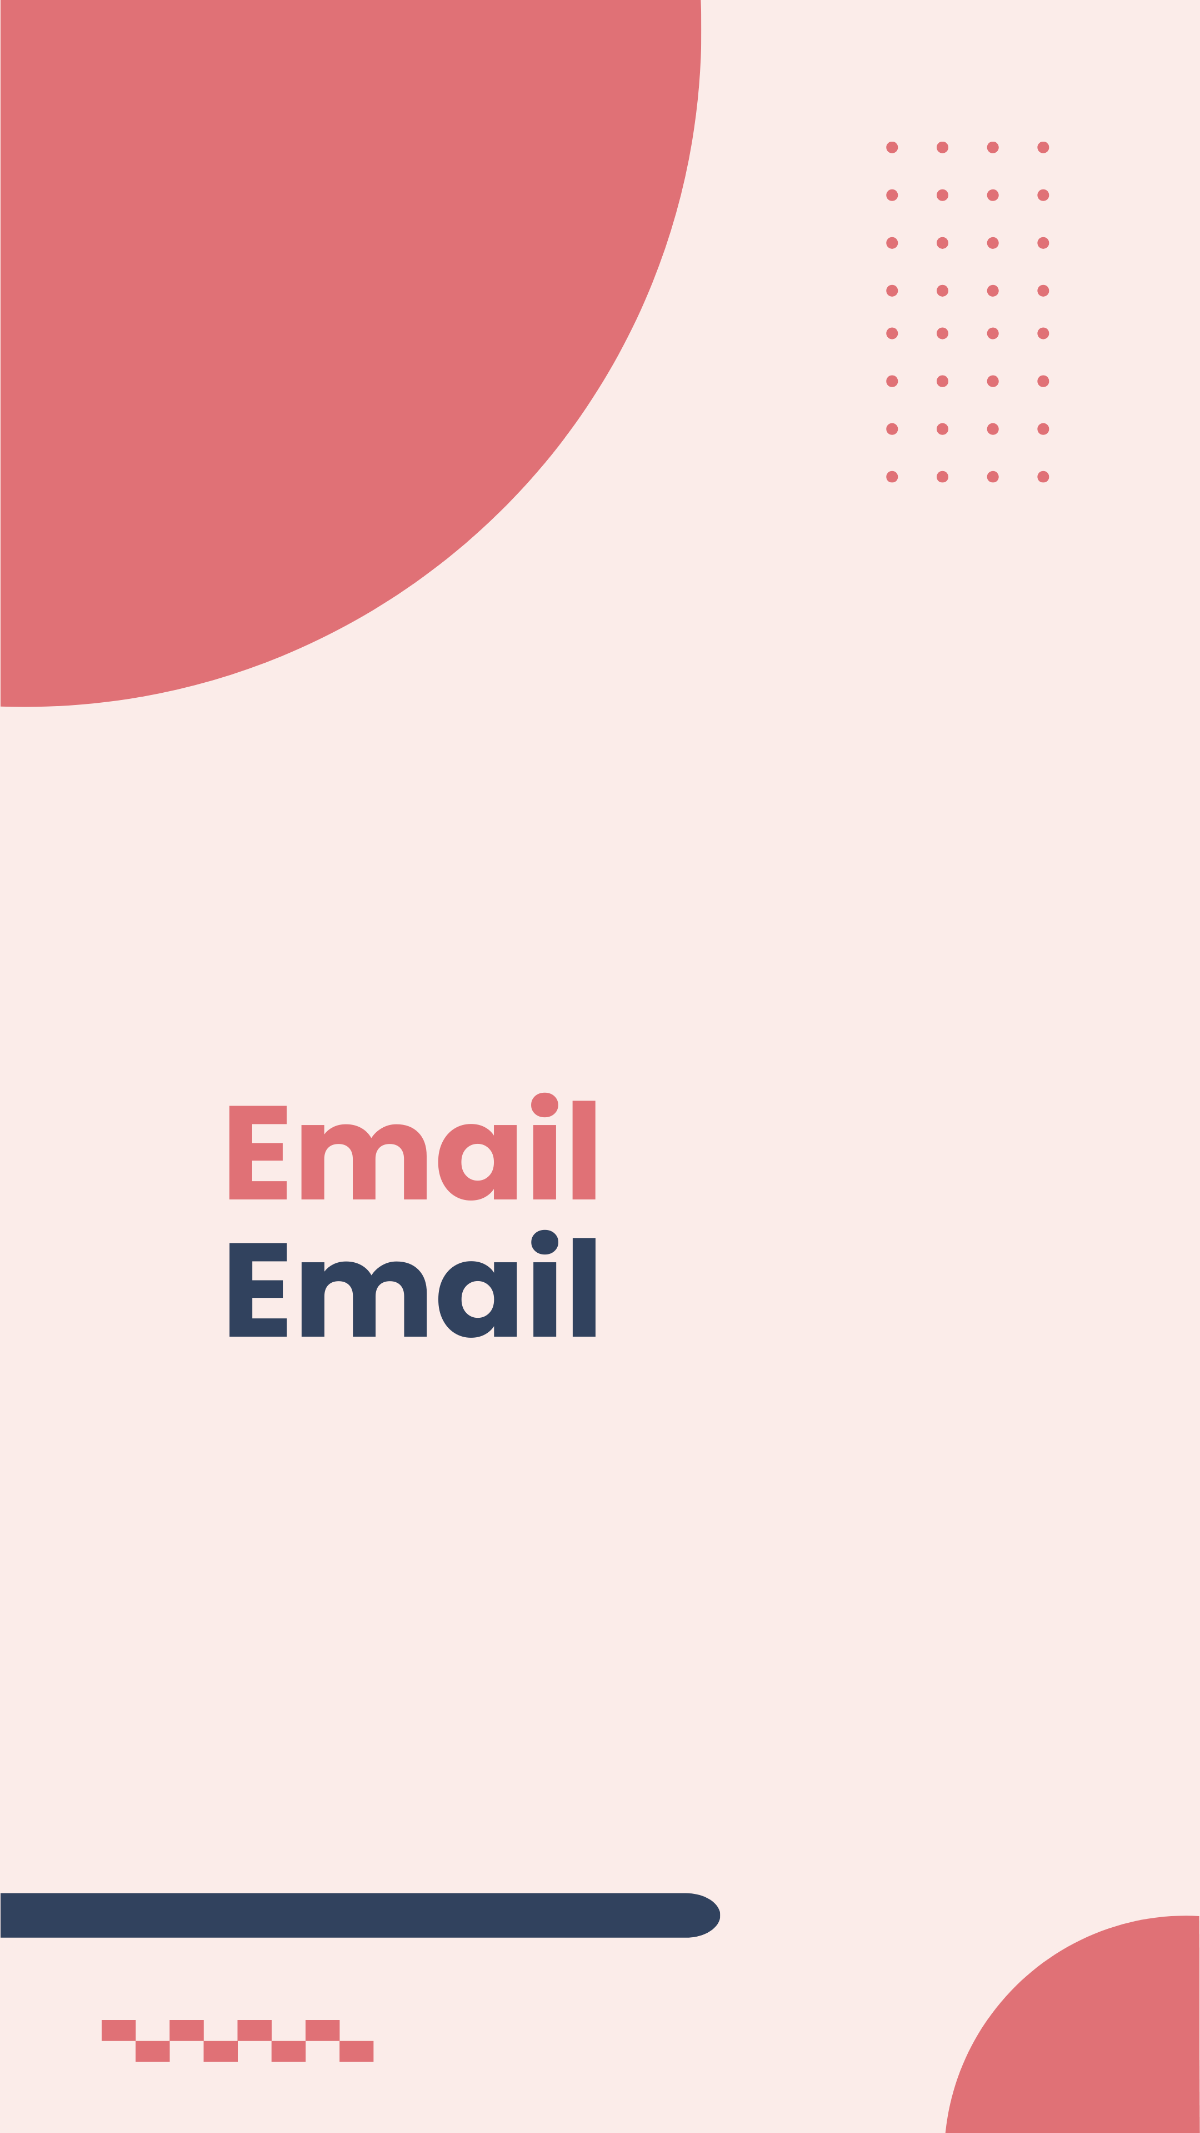 Email List Marketing Carousel Instagram Post Template